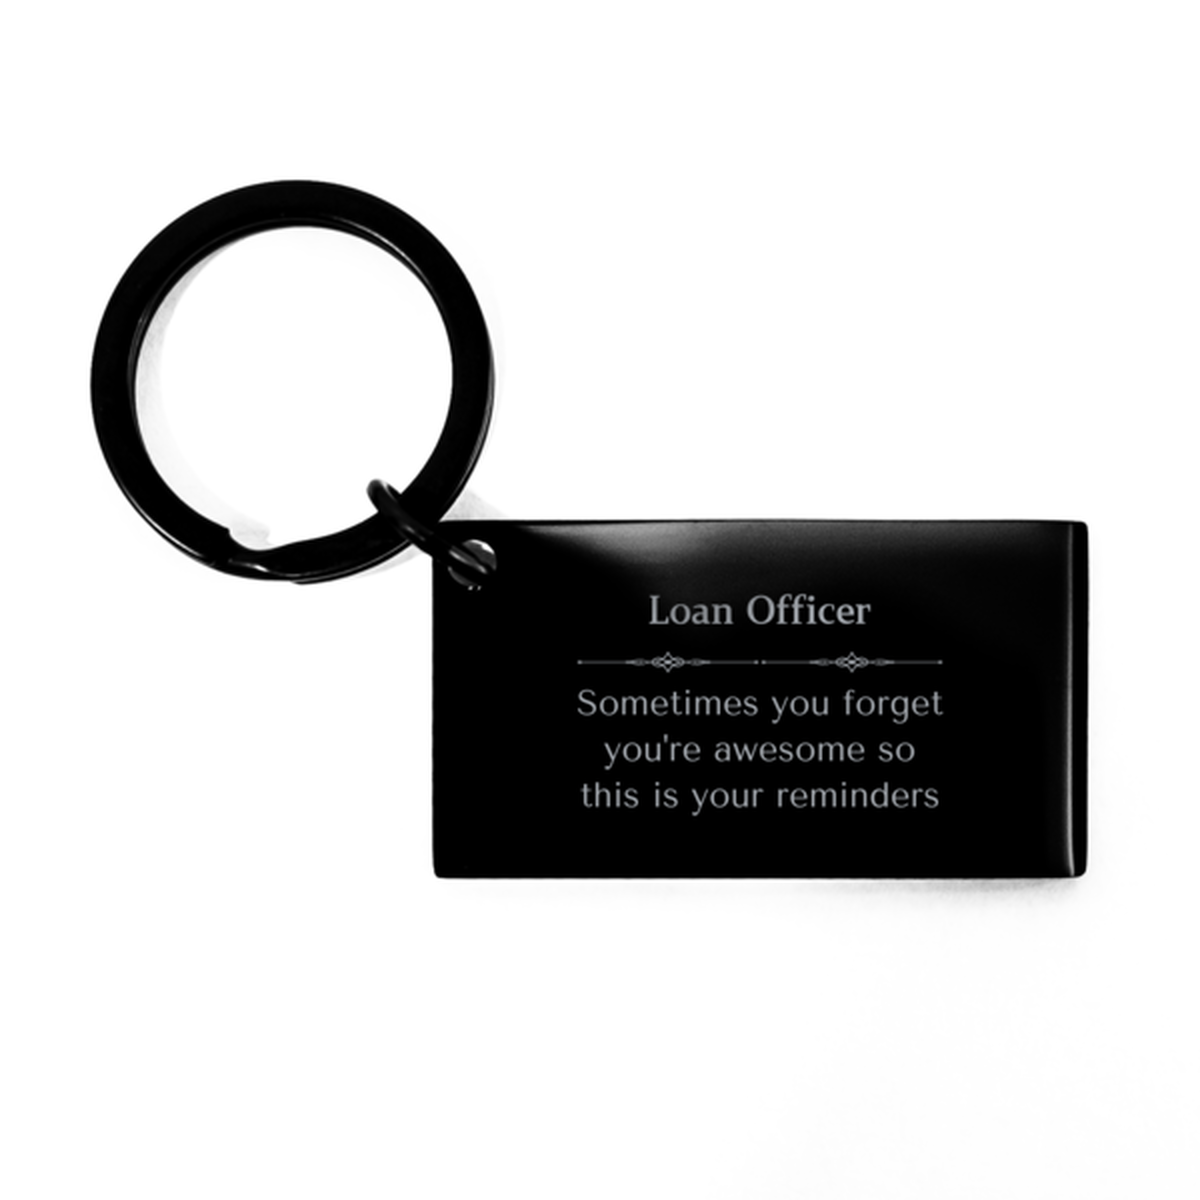 Sentimental Loan Officer Keychain, Nuclear Technologist Sometimes you forget you're awesome so this is your reminders, Graduation Christmas Birthday Gifts for Loan Officer, Men, Women, Coworkers